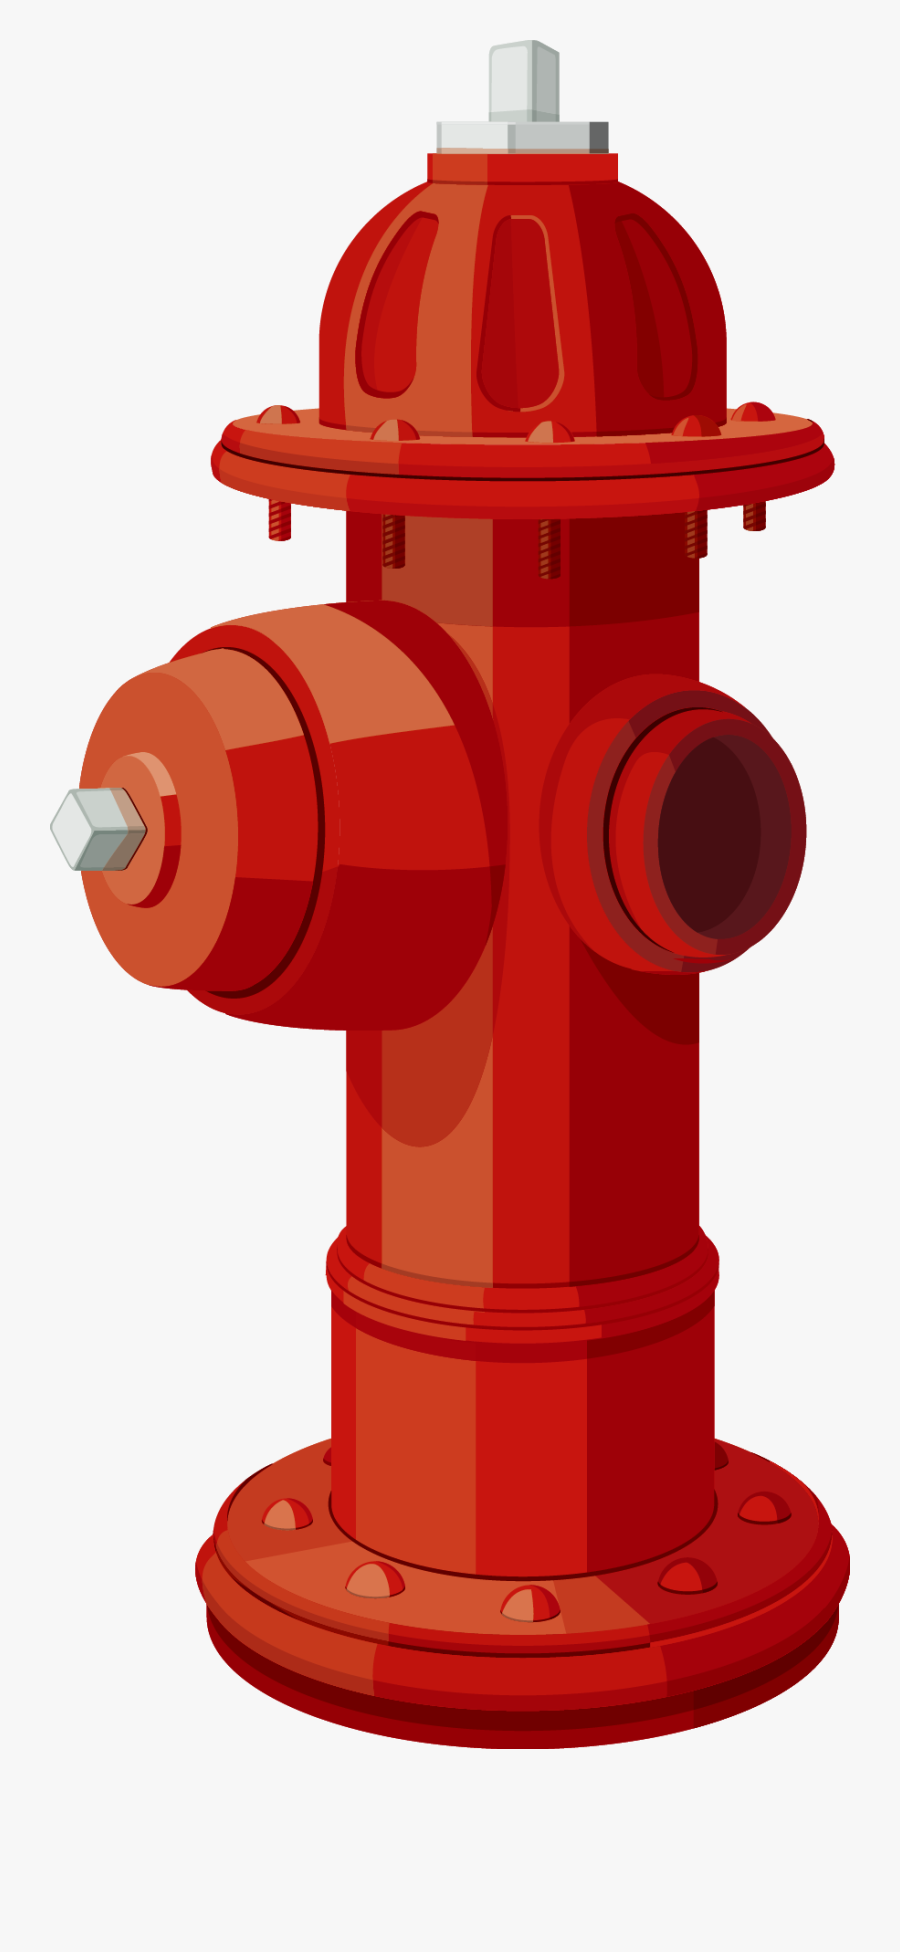 Transparent Fire Hydrant Clipart - Fire Hydrant Vector Png, Transparent Clipart